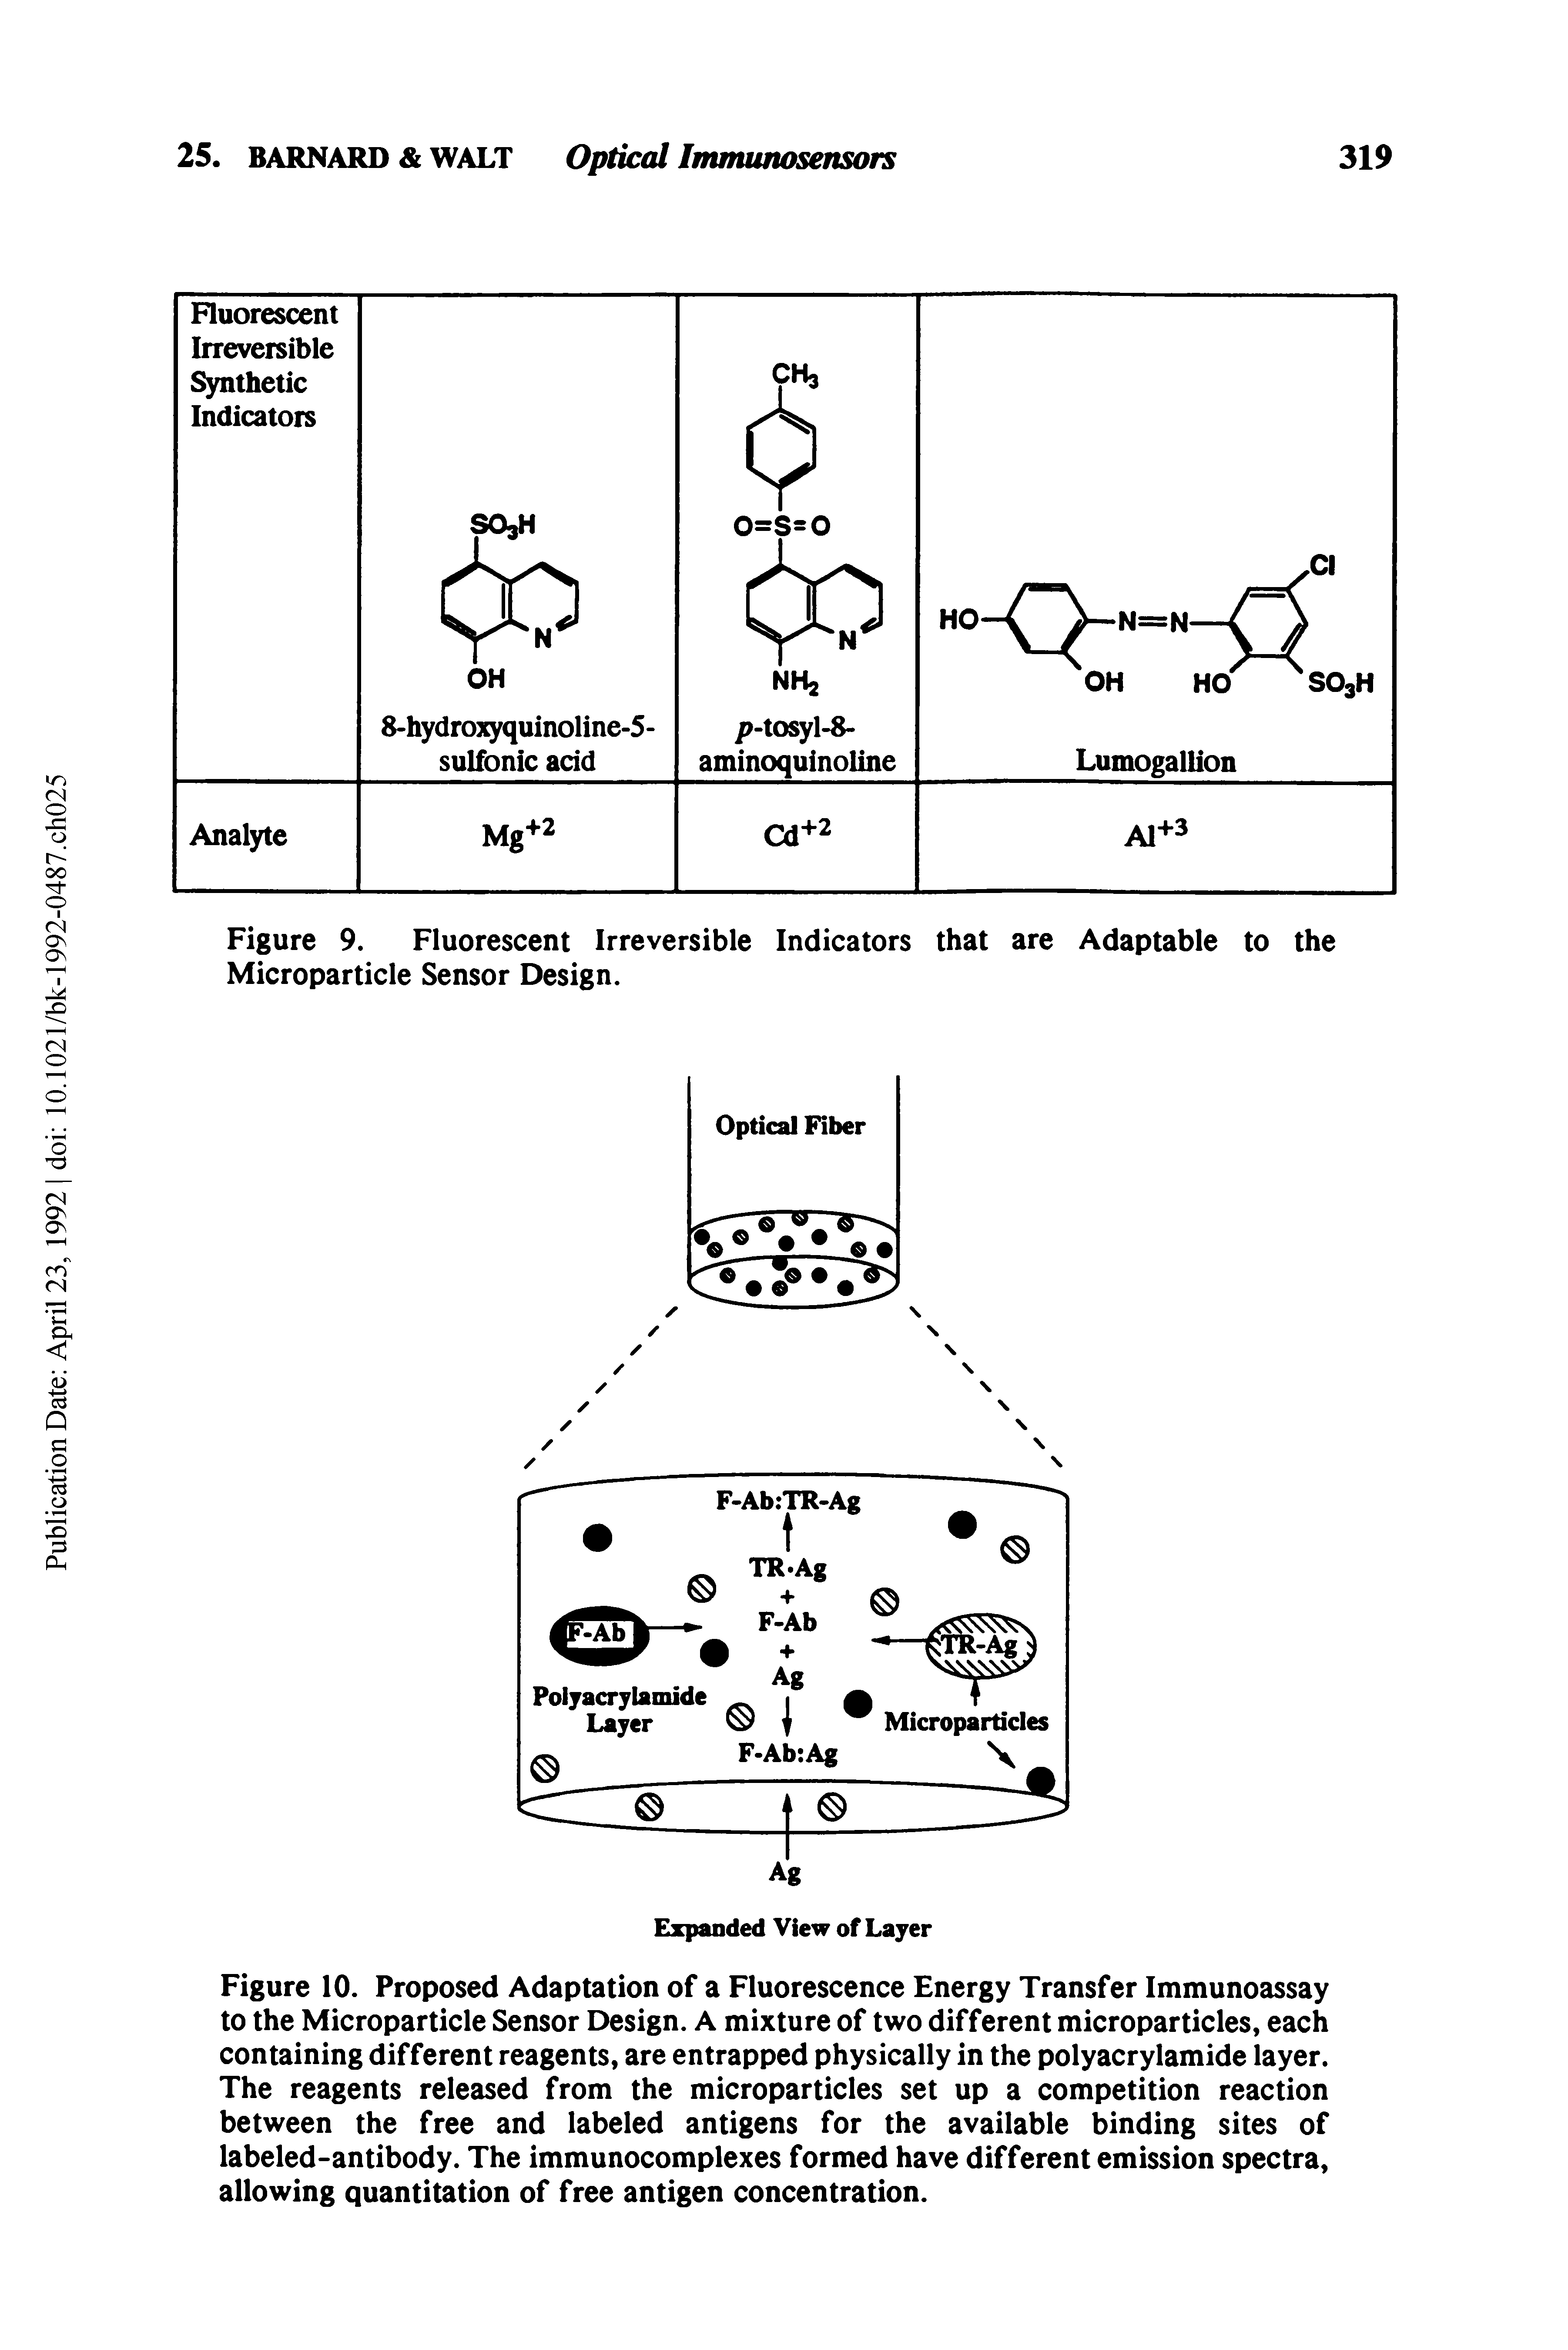 Figure 10. Proposed Adaptation of a Fluorescence Energy Transfer Immunoassay to the Microparticle Sensor Design. A mixture of two different microparticles, each containing different reagents, are entrapped physically in the polyacrylamide layer. The reagents released from the microparticles set up a competition reaction between the free and labeled antigens for the available binding sites of labeled-antibody. The immunocomplexes formed have different emission spectra, allowing quantitation of free antigen concentration.